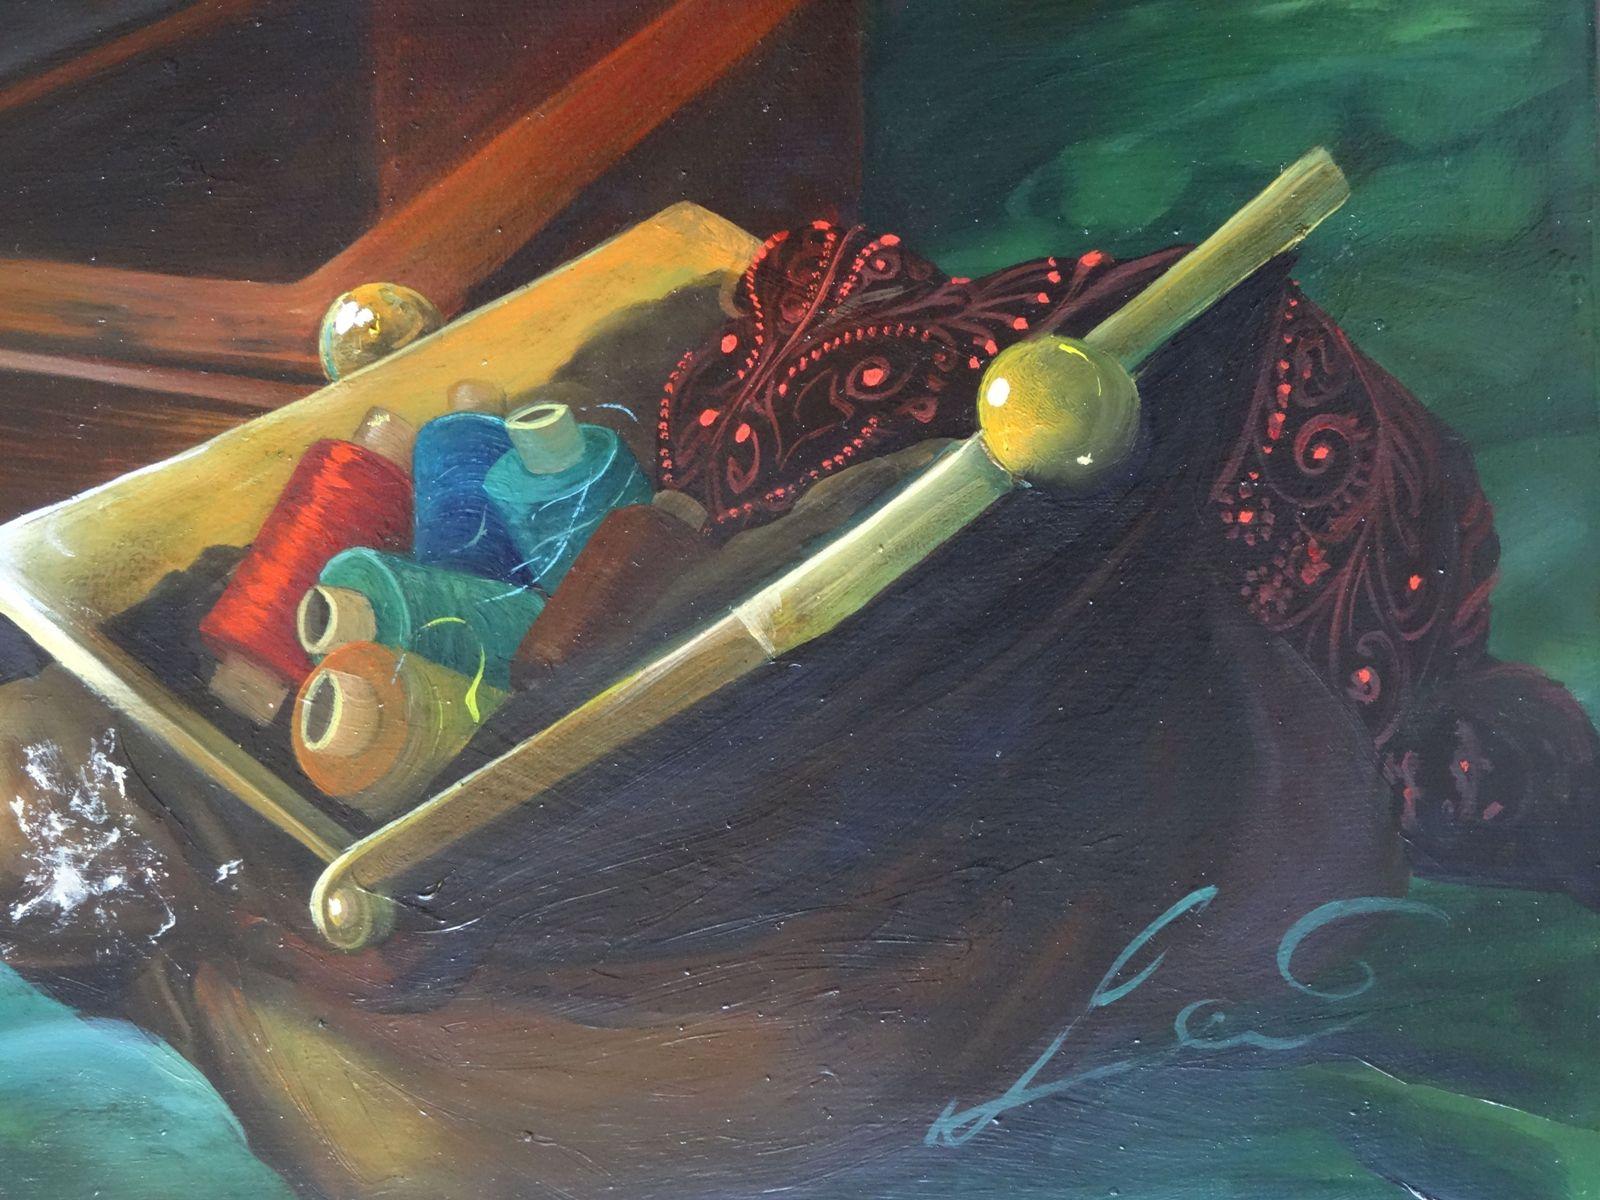 Still life with a sewing machine. 2019. Oil on canvas, 60x90 cm - Painting by Arturs Amatnieks (Leon) 